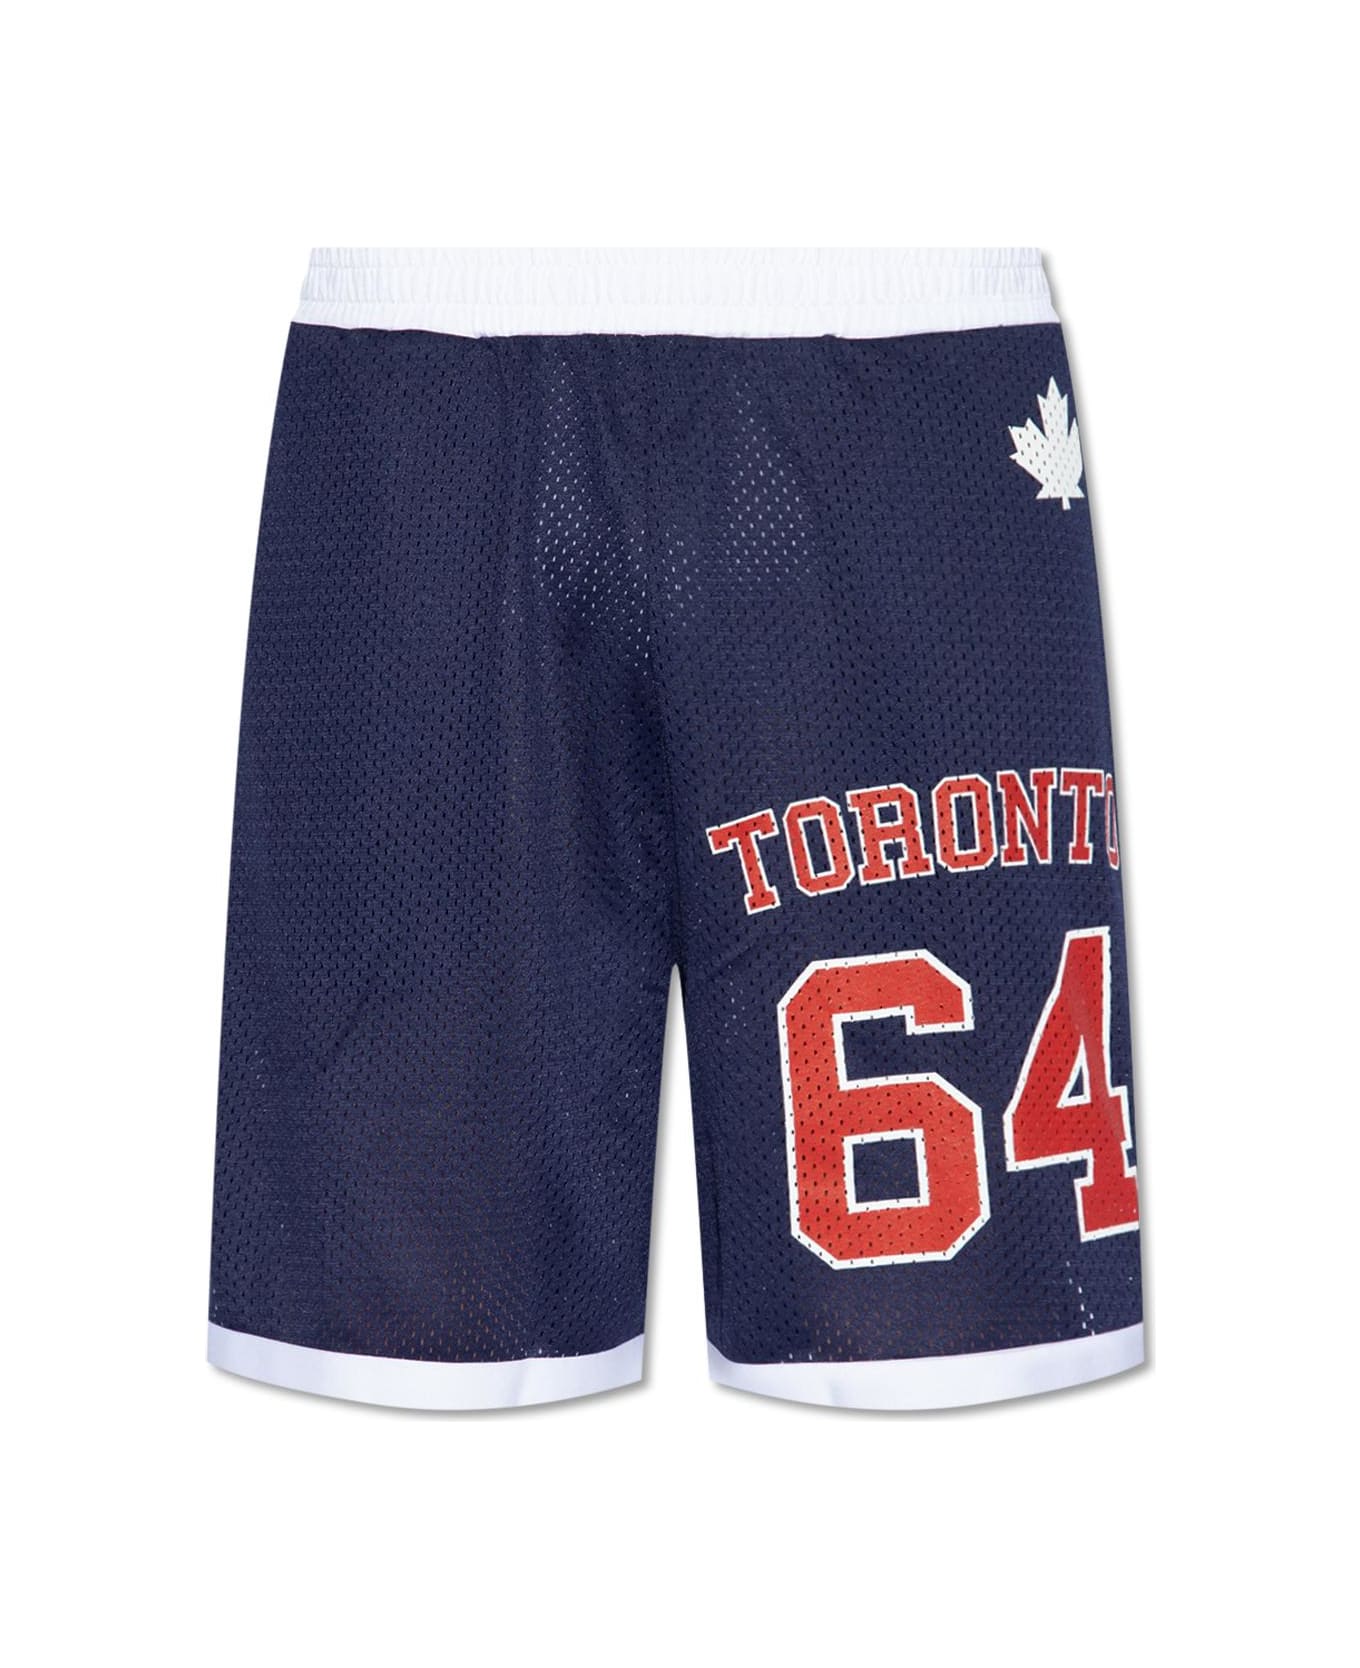 Dsquared2 Mesh Fabric Shorts With Logos - NAVY BLUE